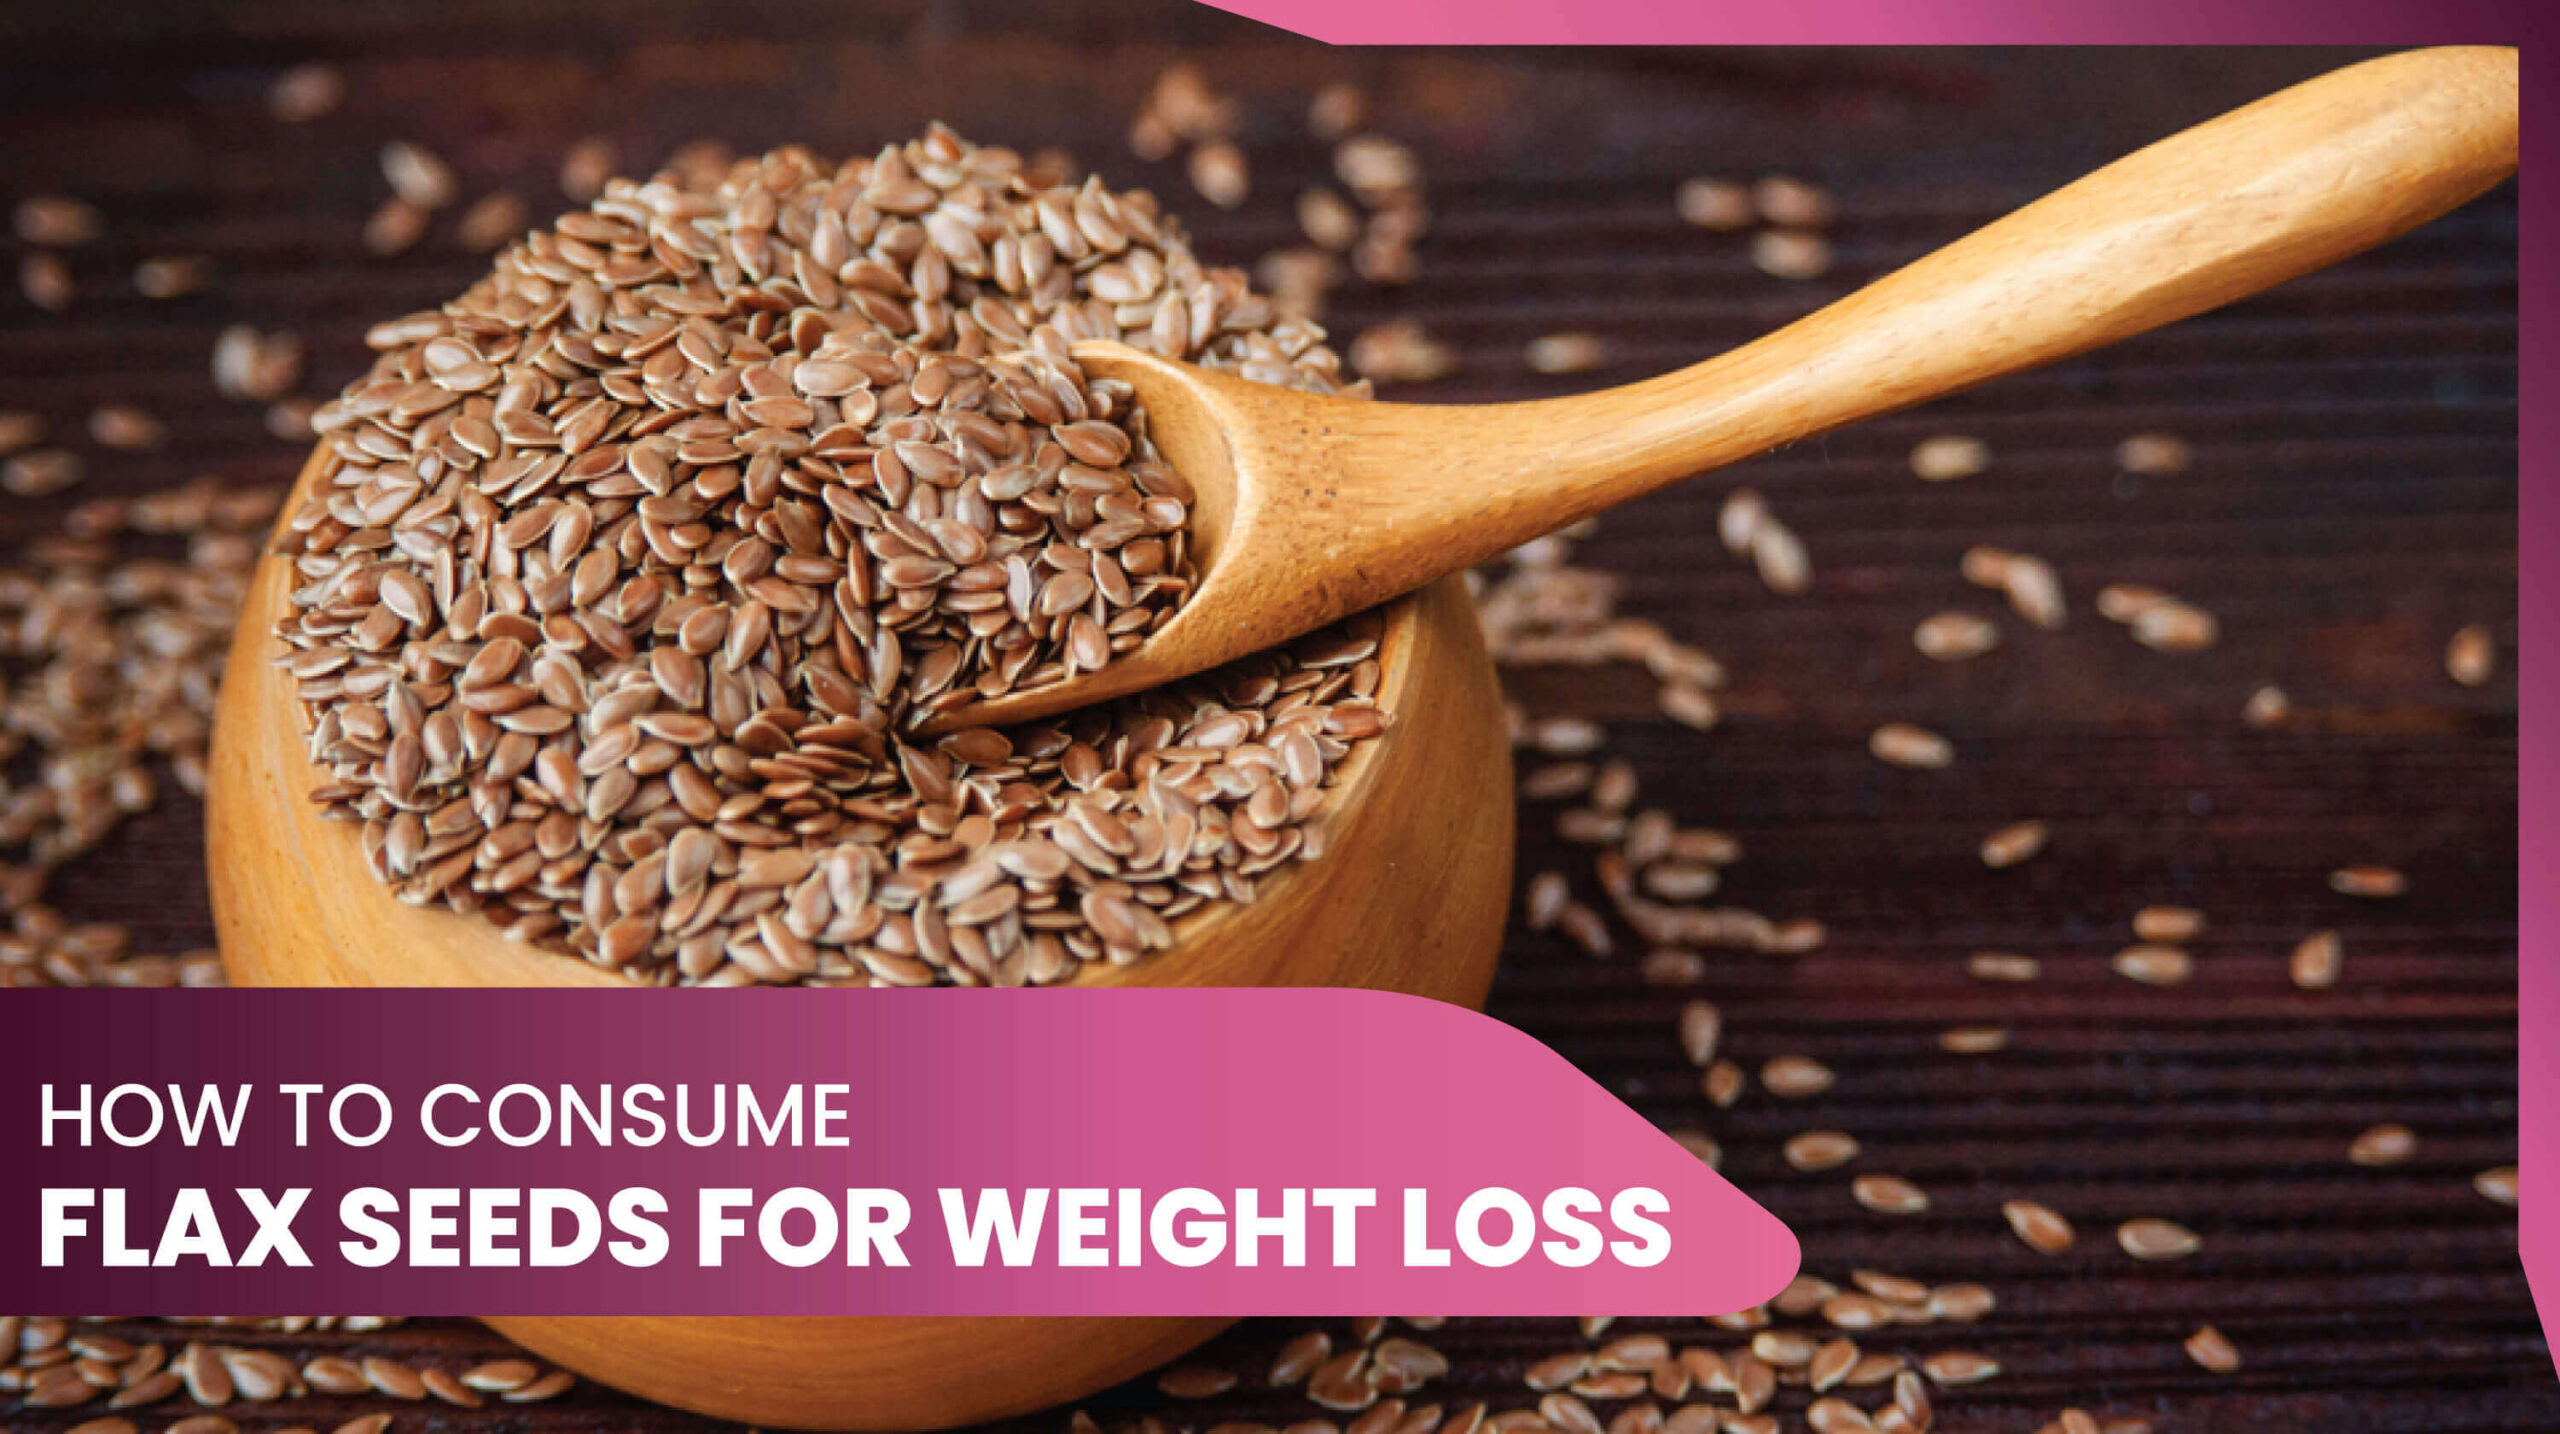 11benefits of flax seeds for weight loss